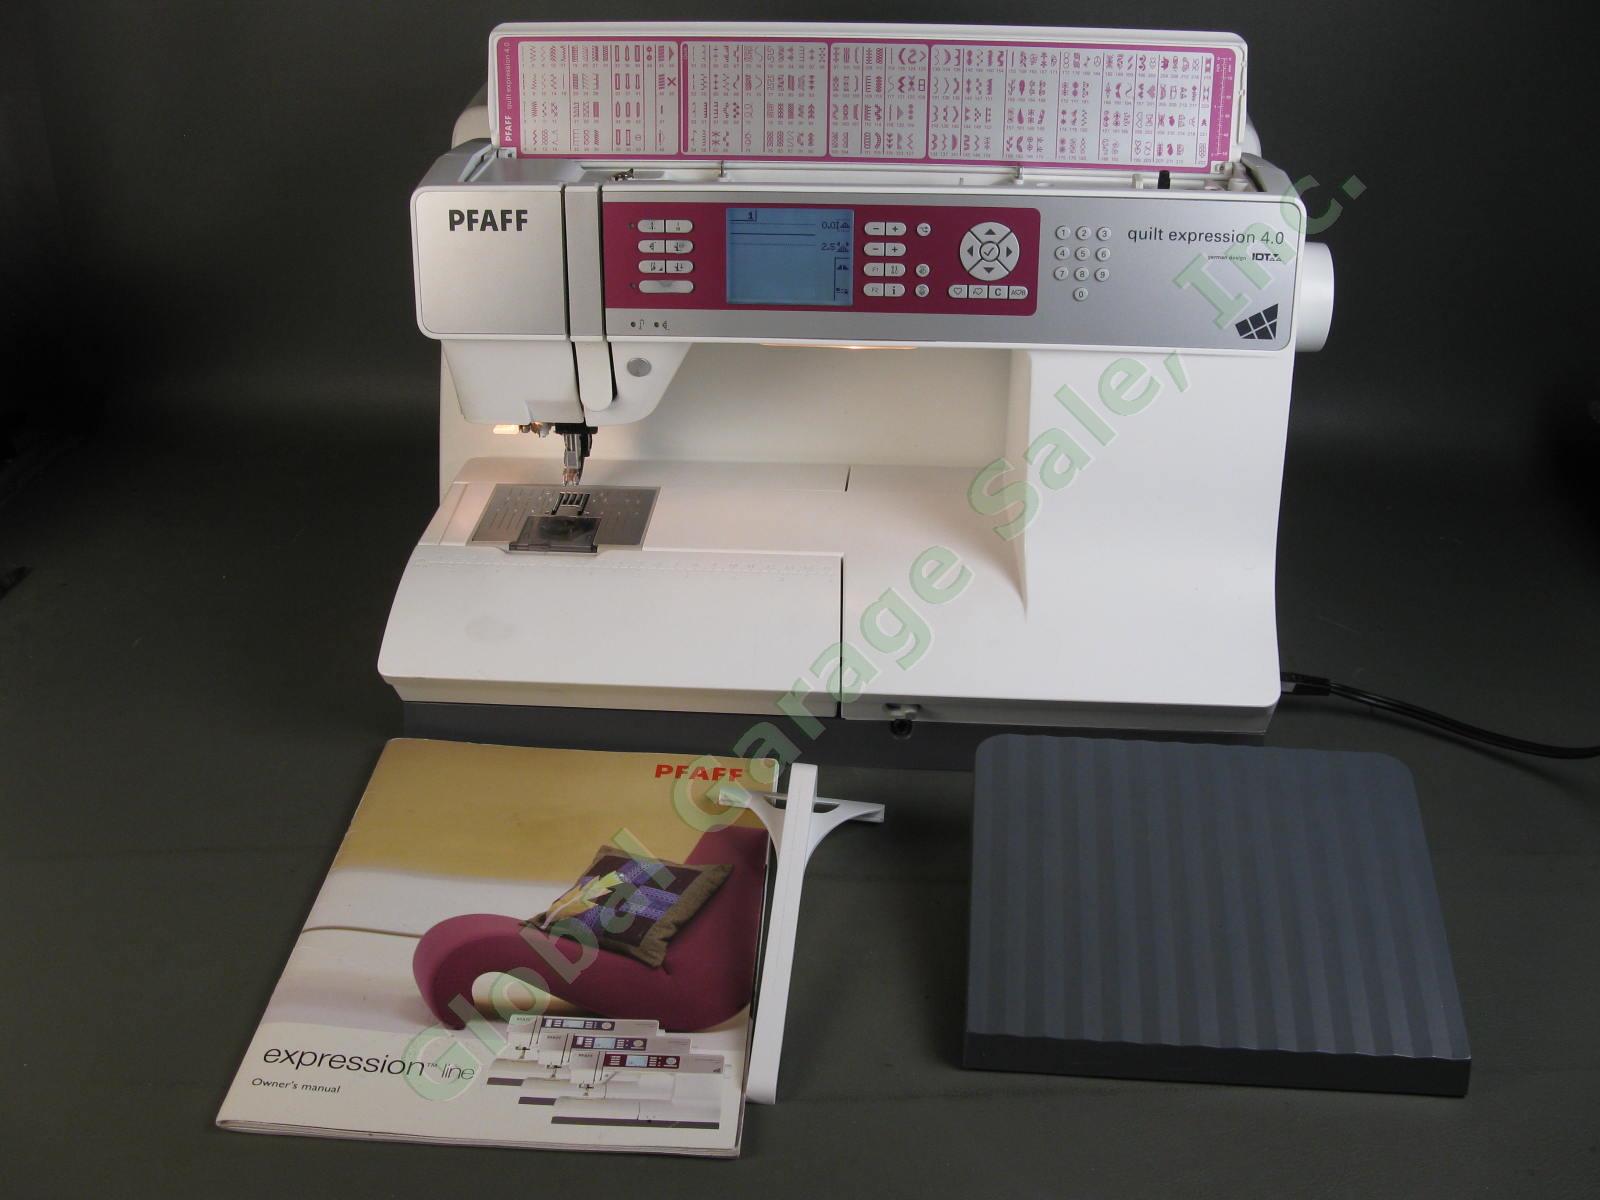 Pfaff Quilt Expression 4.0 Sewing Machine One Owner Just Dealer Serviced Cleaned